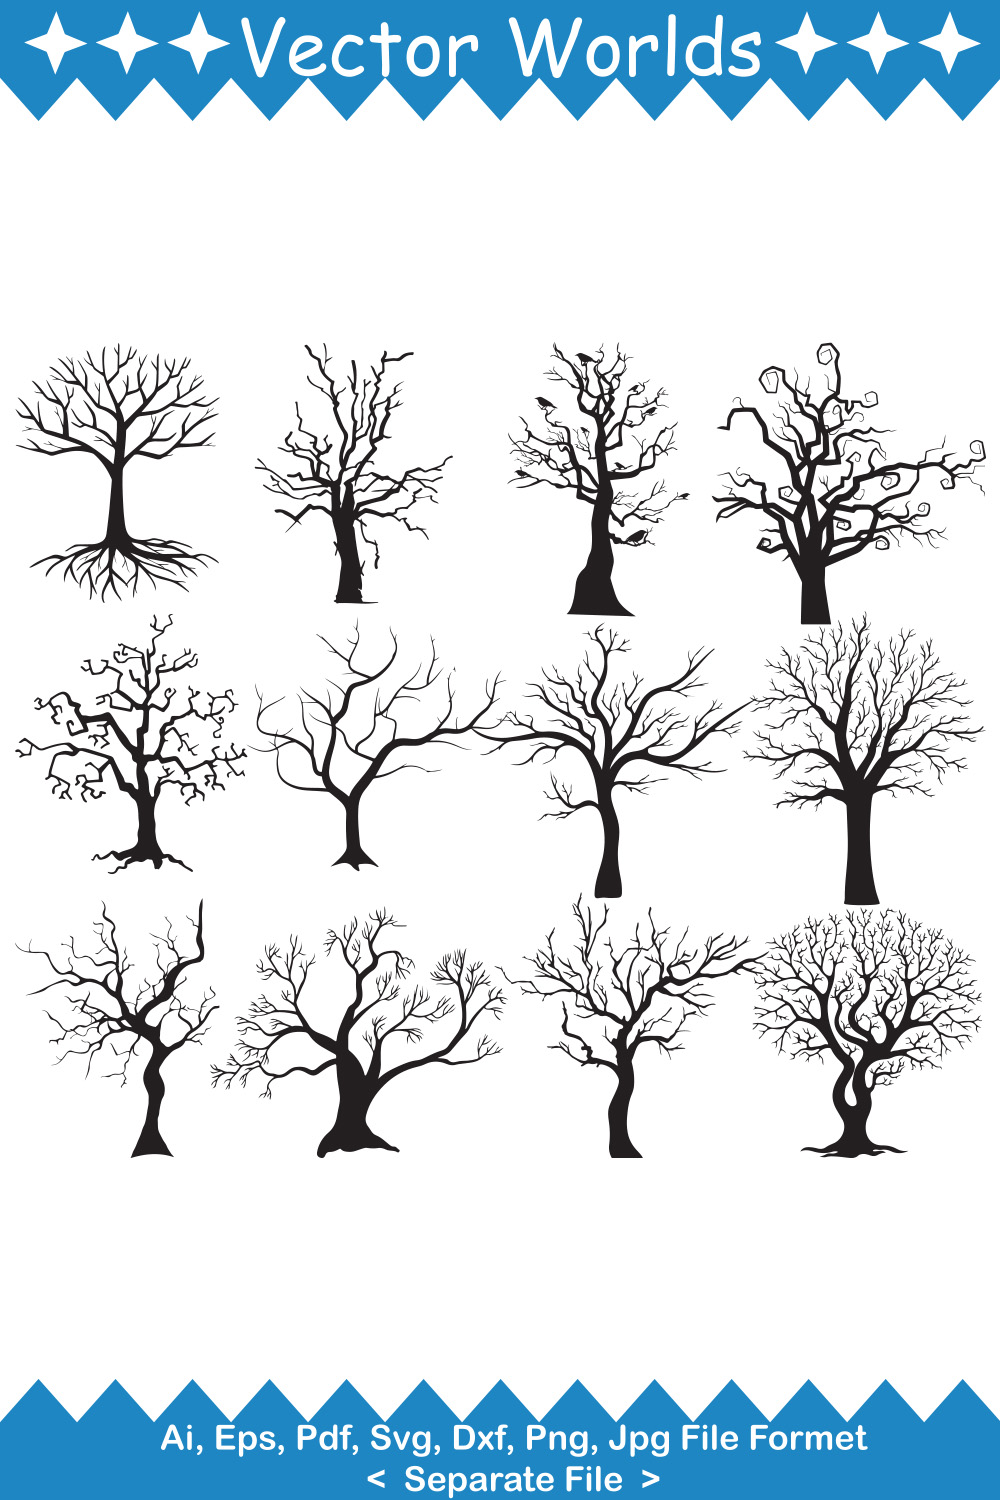 Set of vector exquisite images of branching trees silhouettes.